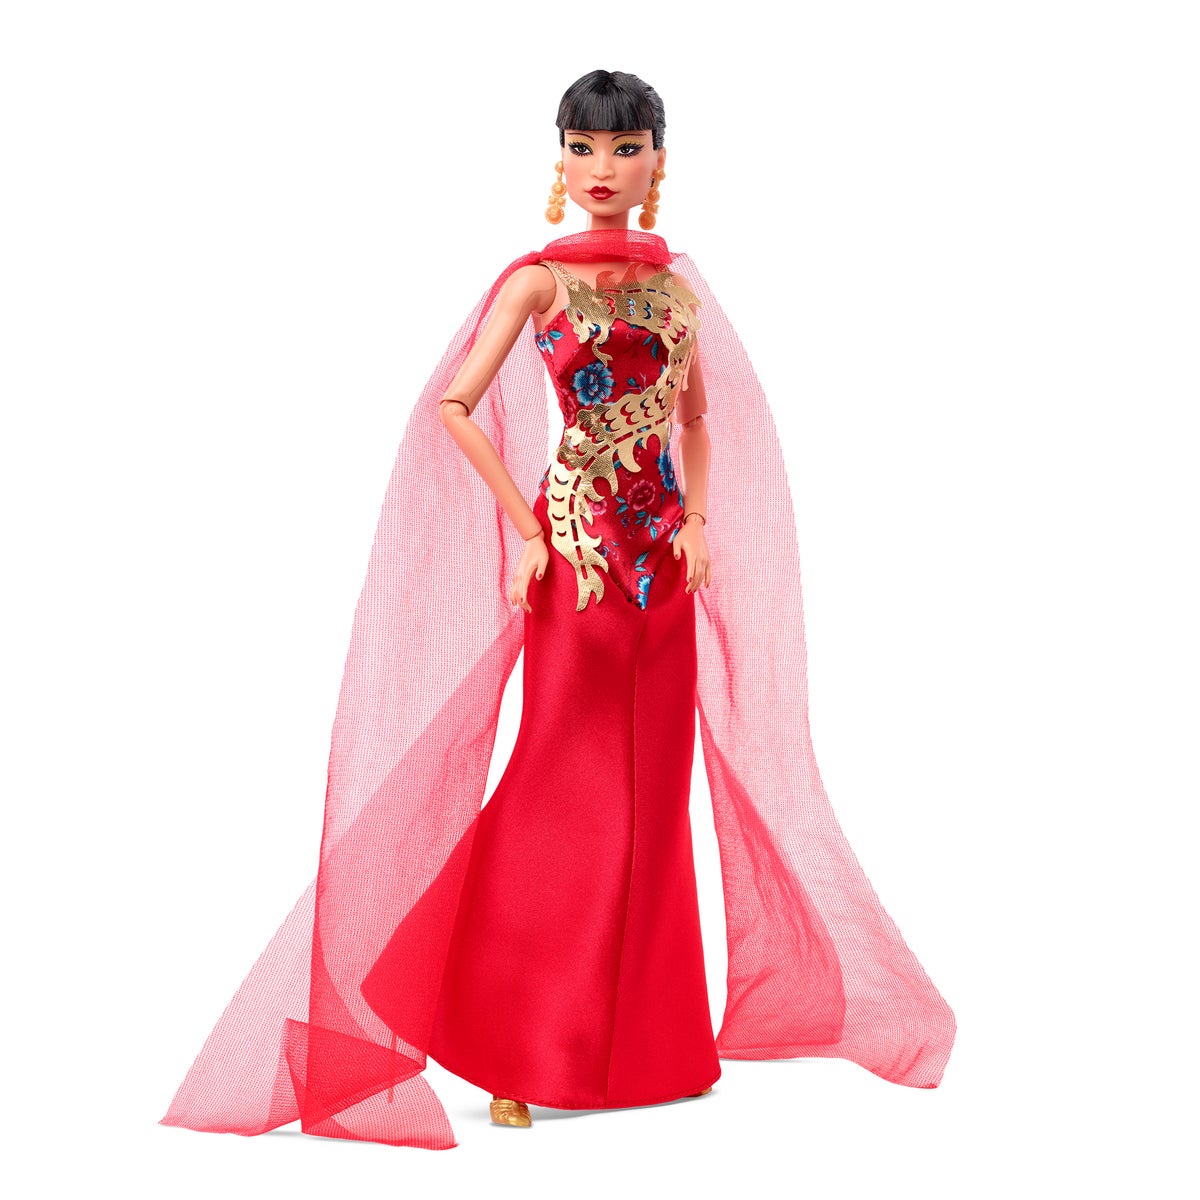 Barbie unveils Anna May Wong doll for Heritage Month | The Independent